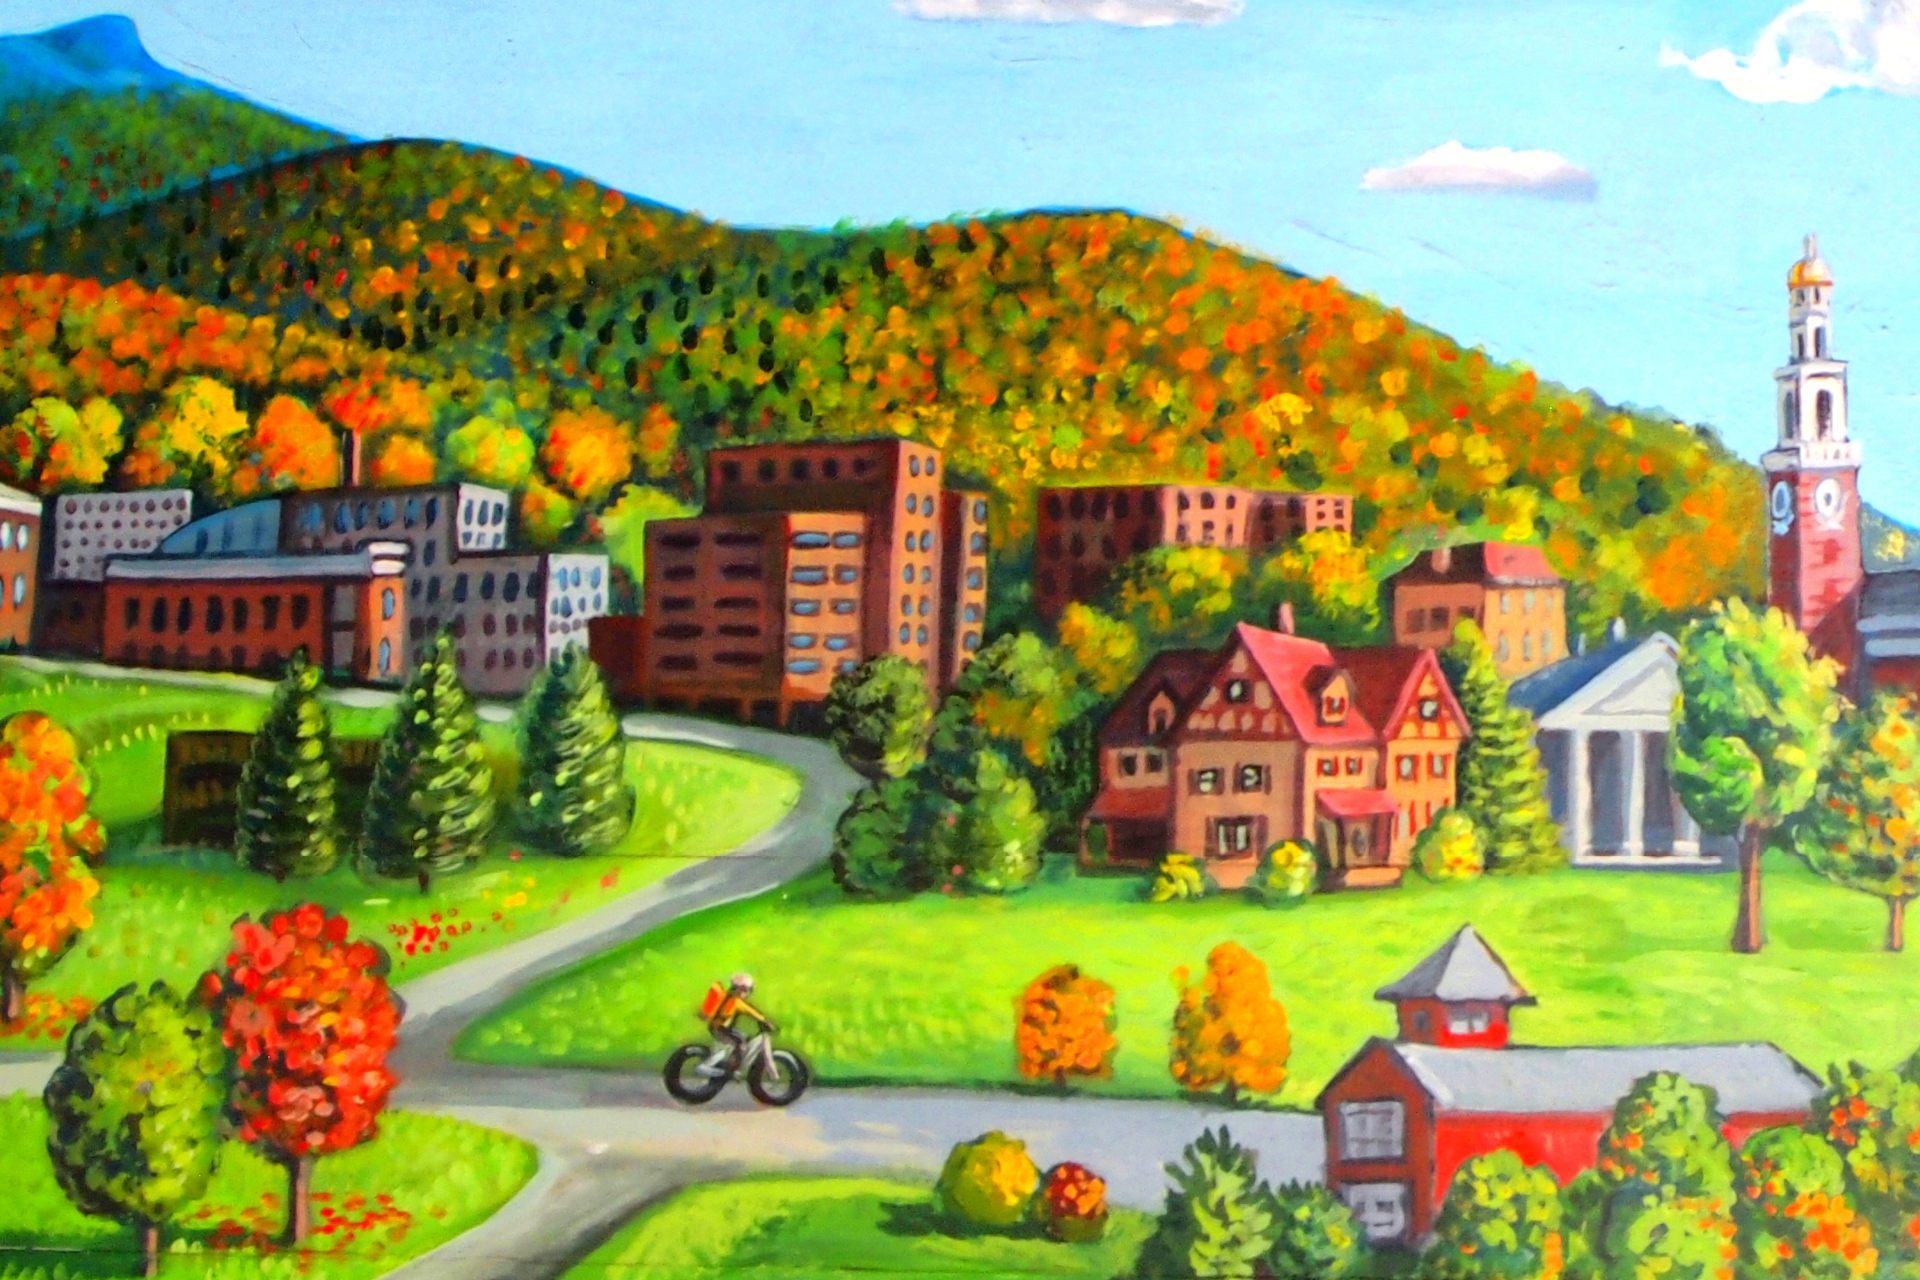 Mural painting with roads, buildings and trees on a rolling fall foliage landscape